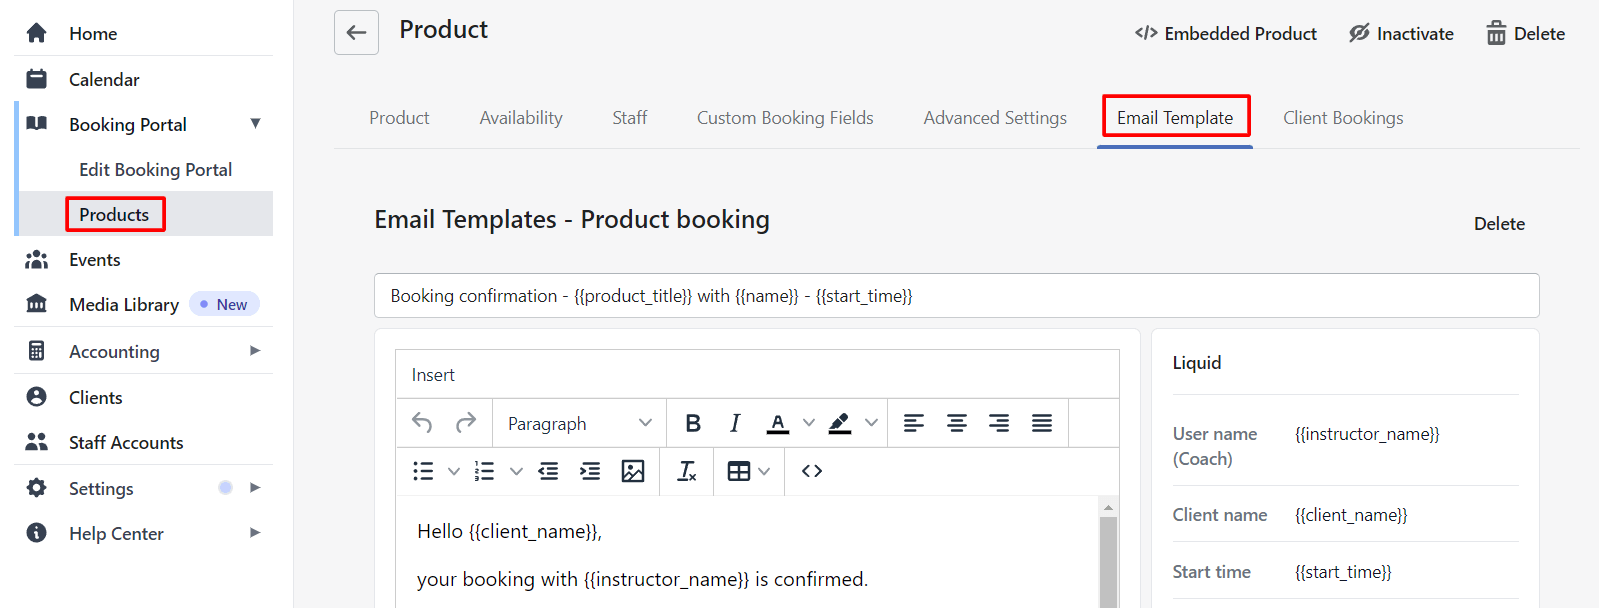 Product Booking email template within the products section of Planubo